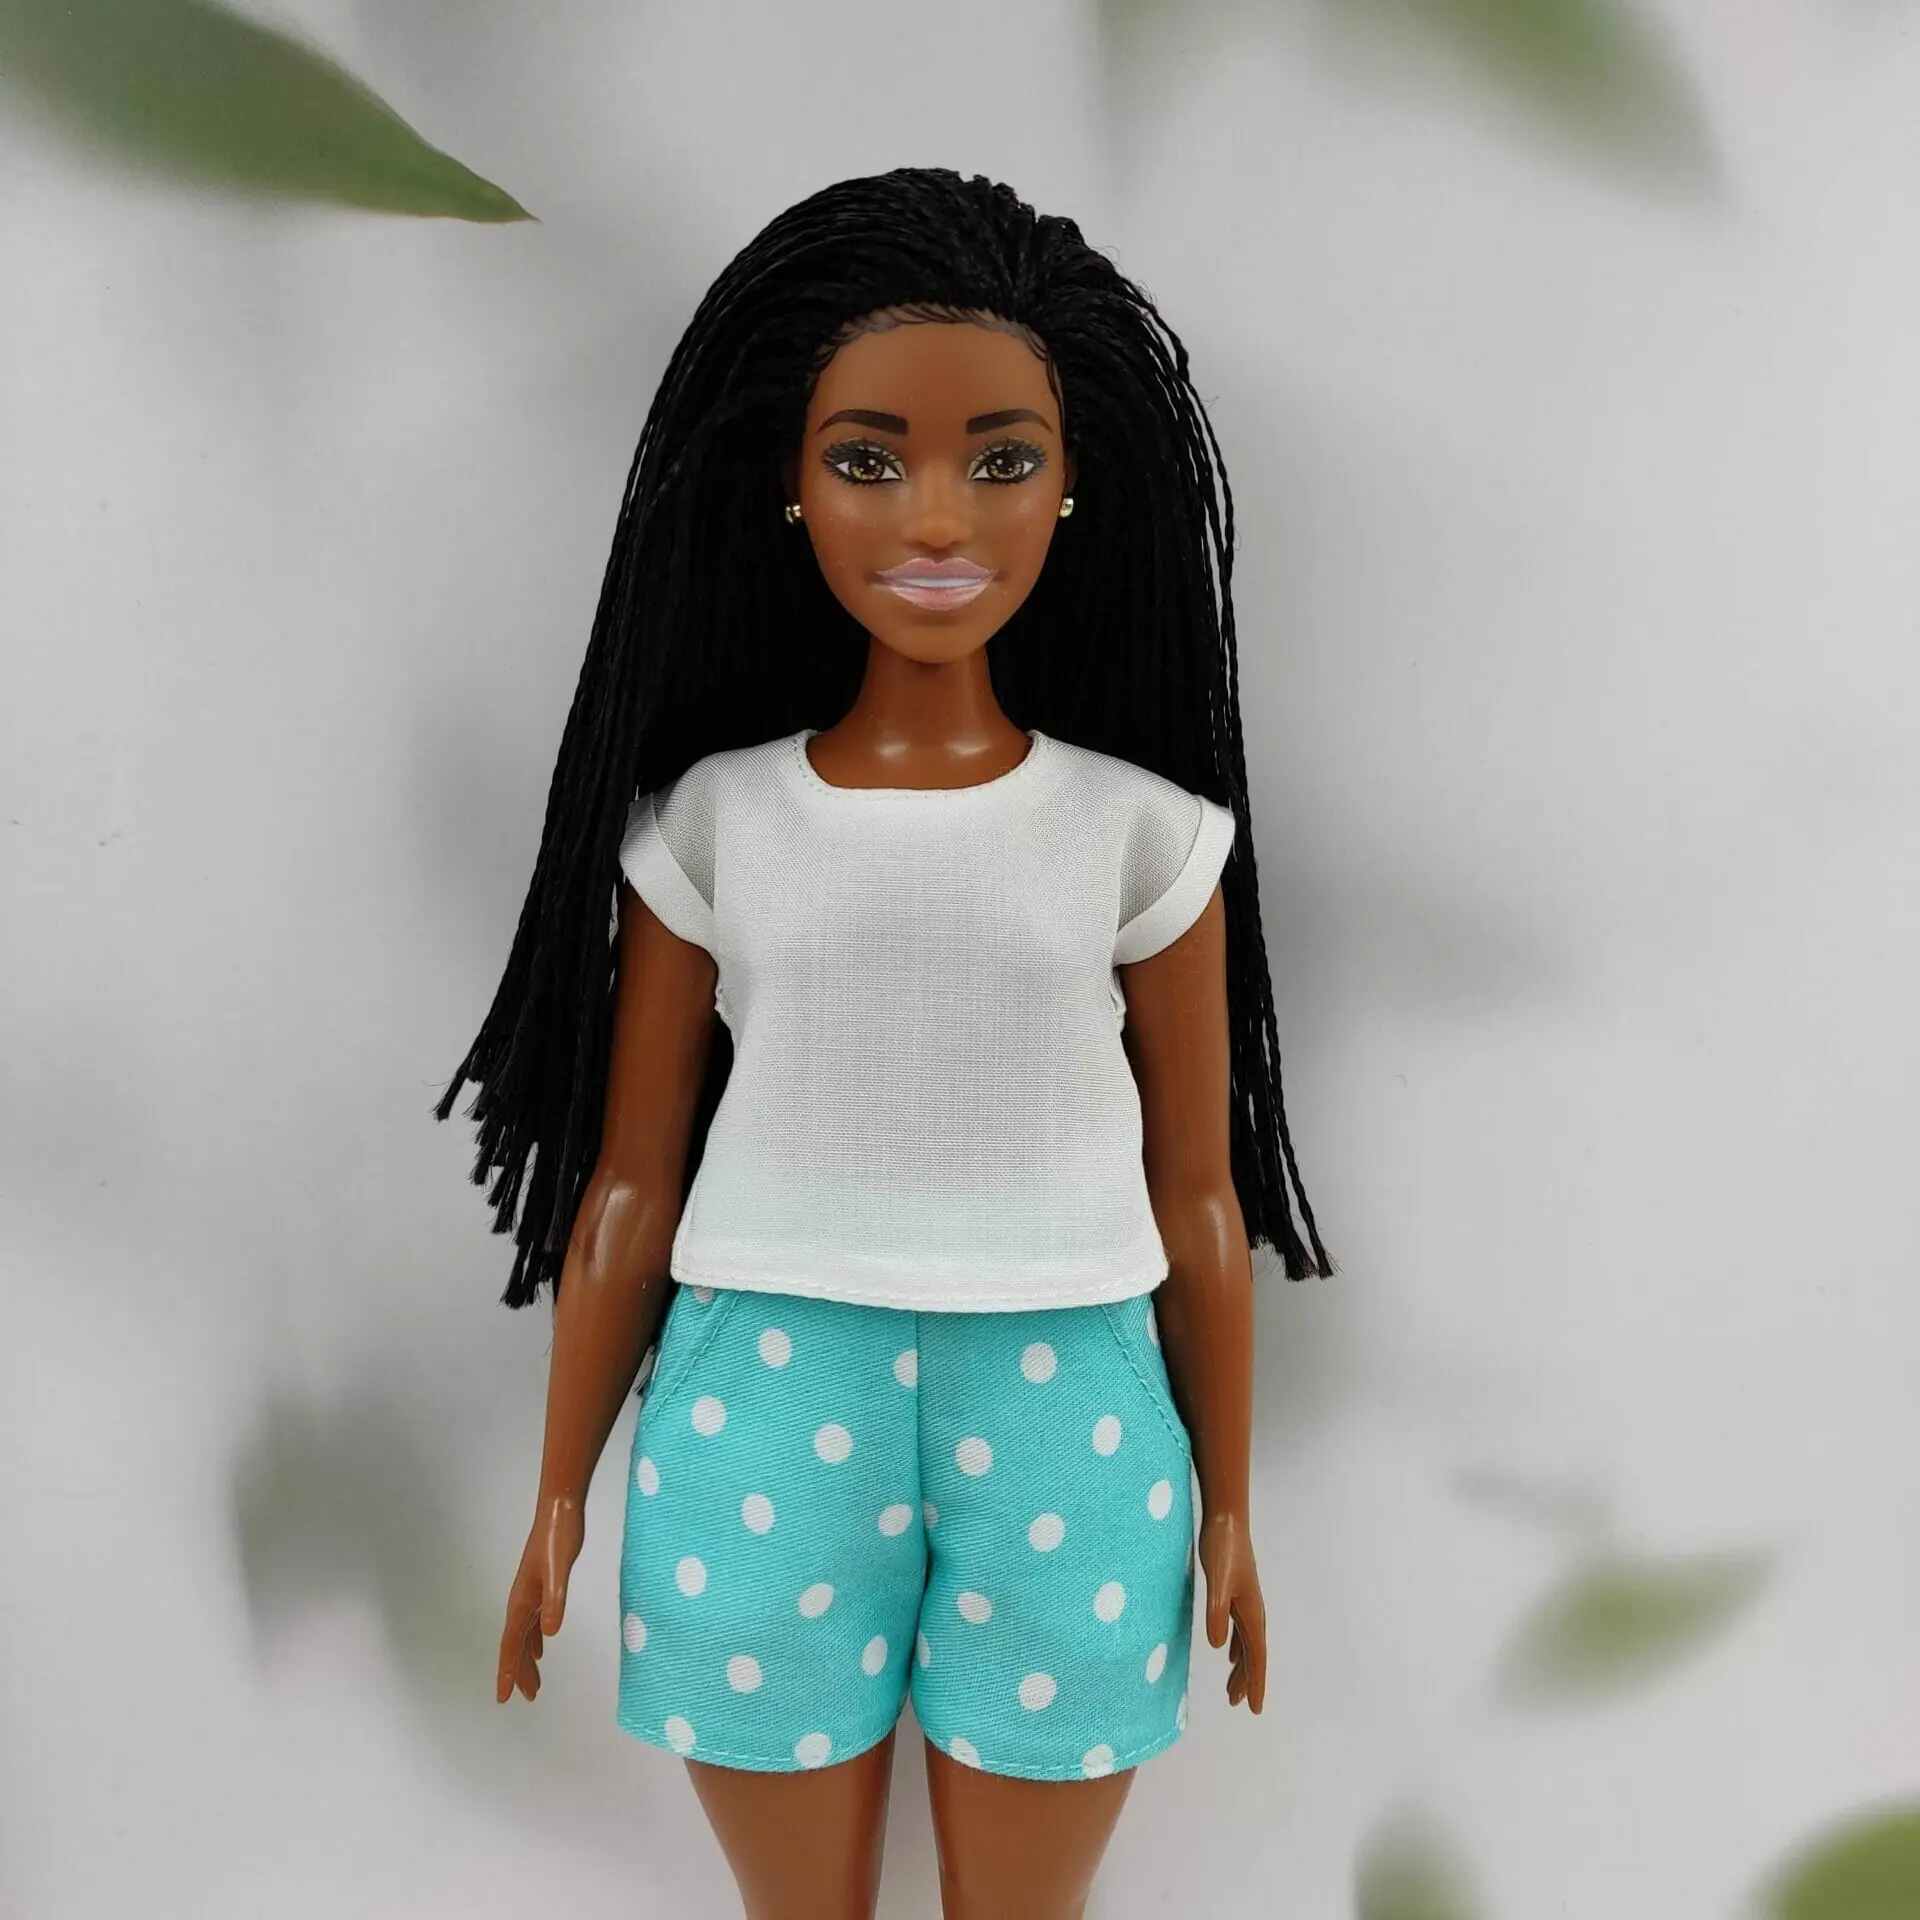 Barbie doll clothes | White shorts for Barbie curvy